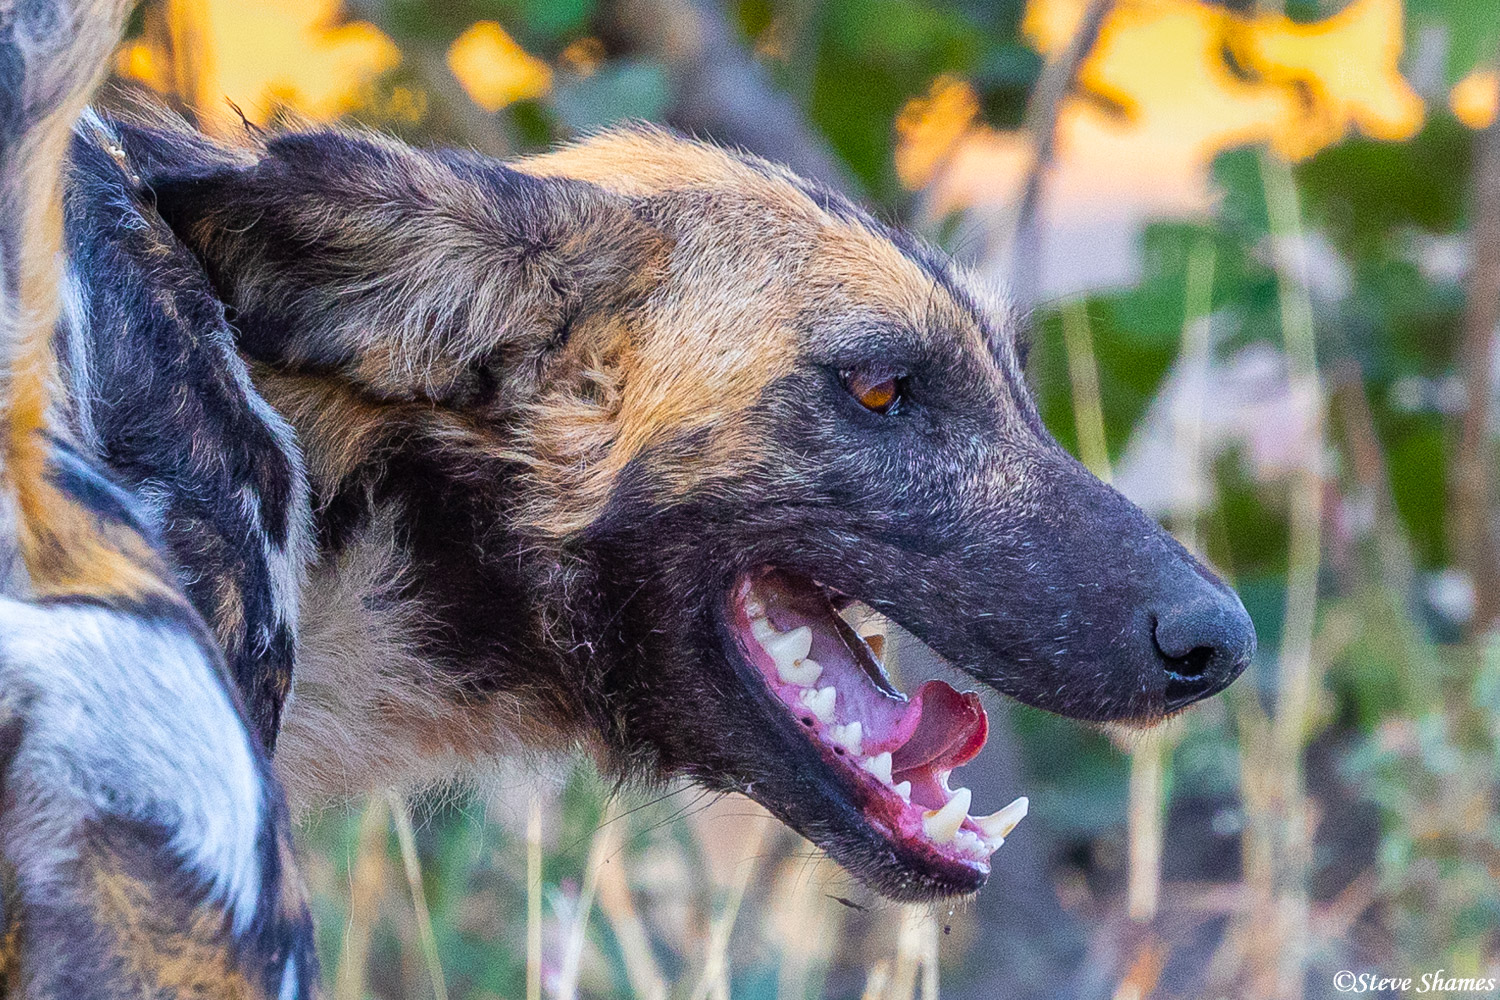 Close up of an African wild dog. Looks pretty much like most dogs.